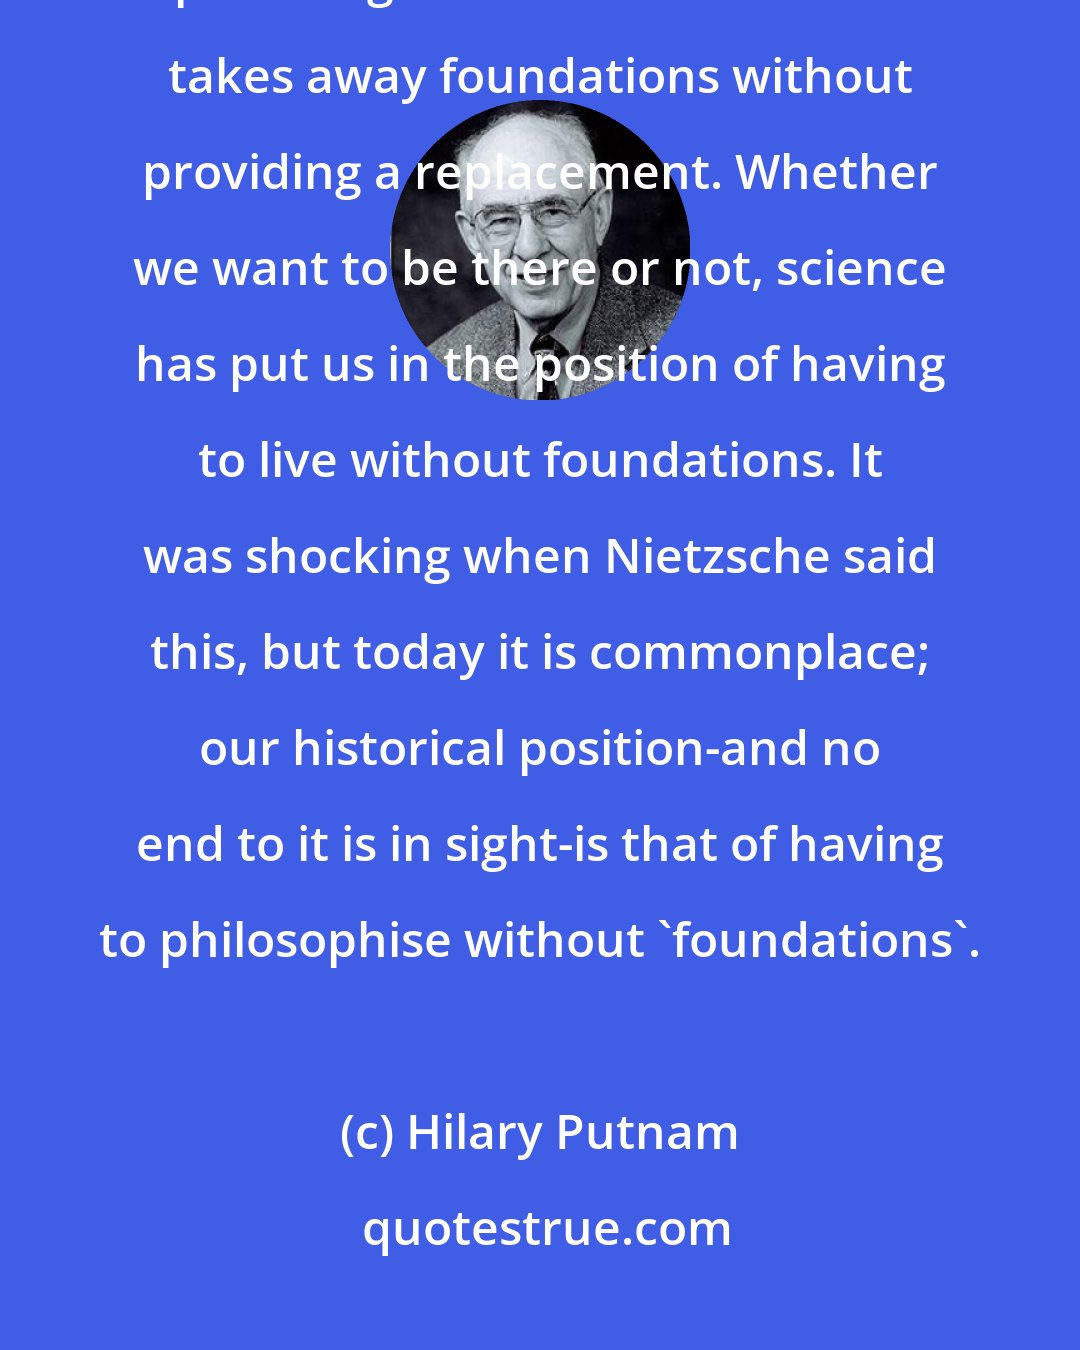 Hilary Putnam: Science is wonderful at destroying metaphysical answers, but incapable of providing substitute ones. Science takes away foundations without providing a replacement. Whether we want to be there or not, science has put us in the position of having to live without foundations. It was shocking when Nietzsche said this, but today it is commonplace; our historical position-and no end to it is in sight-is that of having to philosophise without 'foundations'.